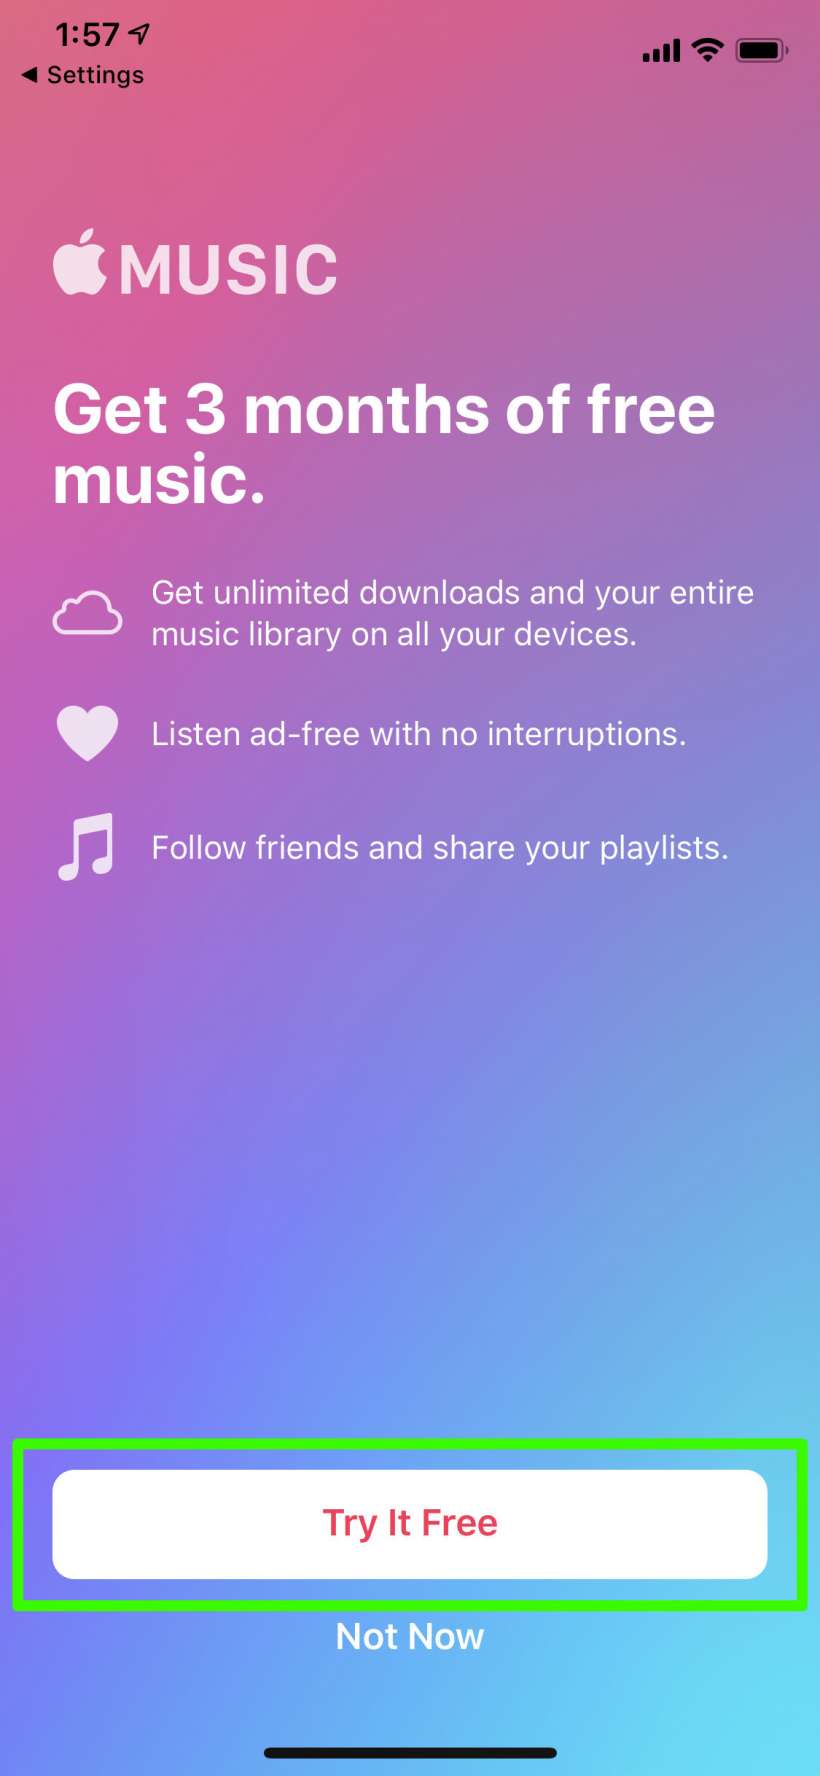 How to join Apple Music and get 3 months free | The iPhone FAQ